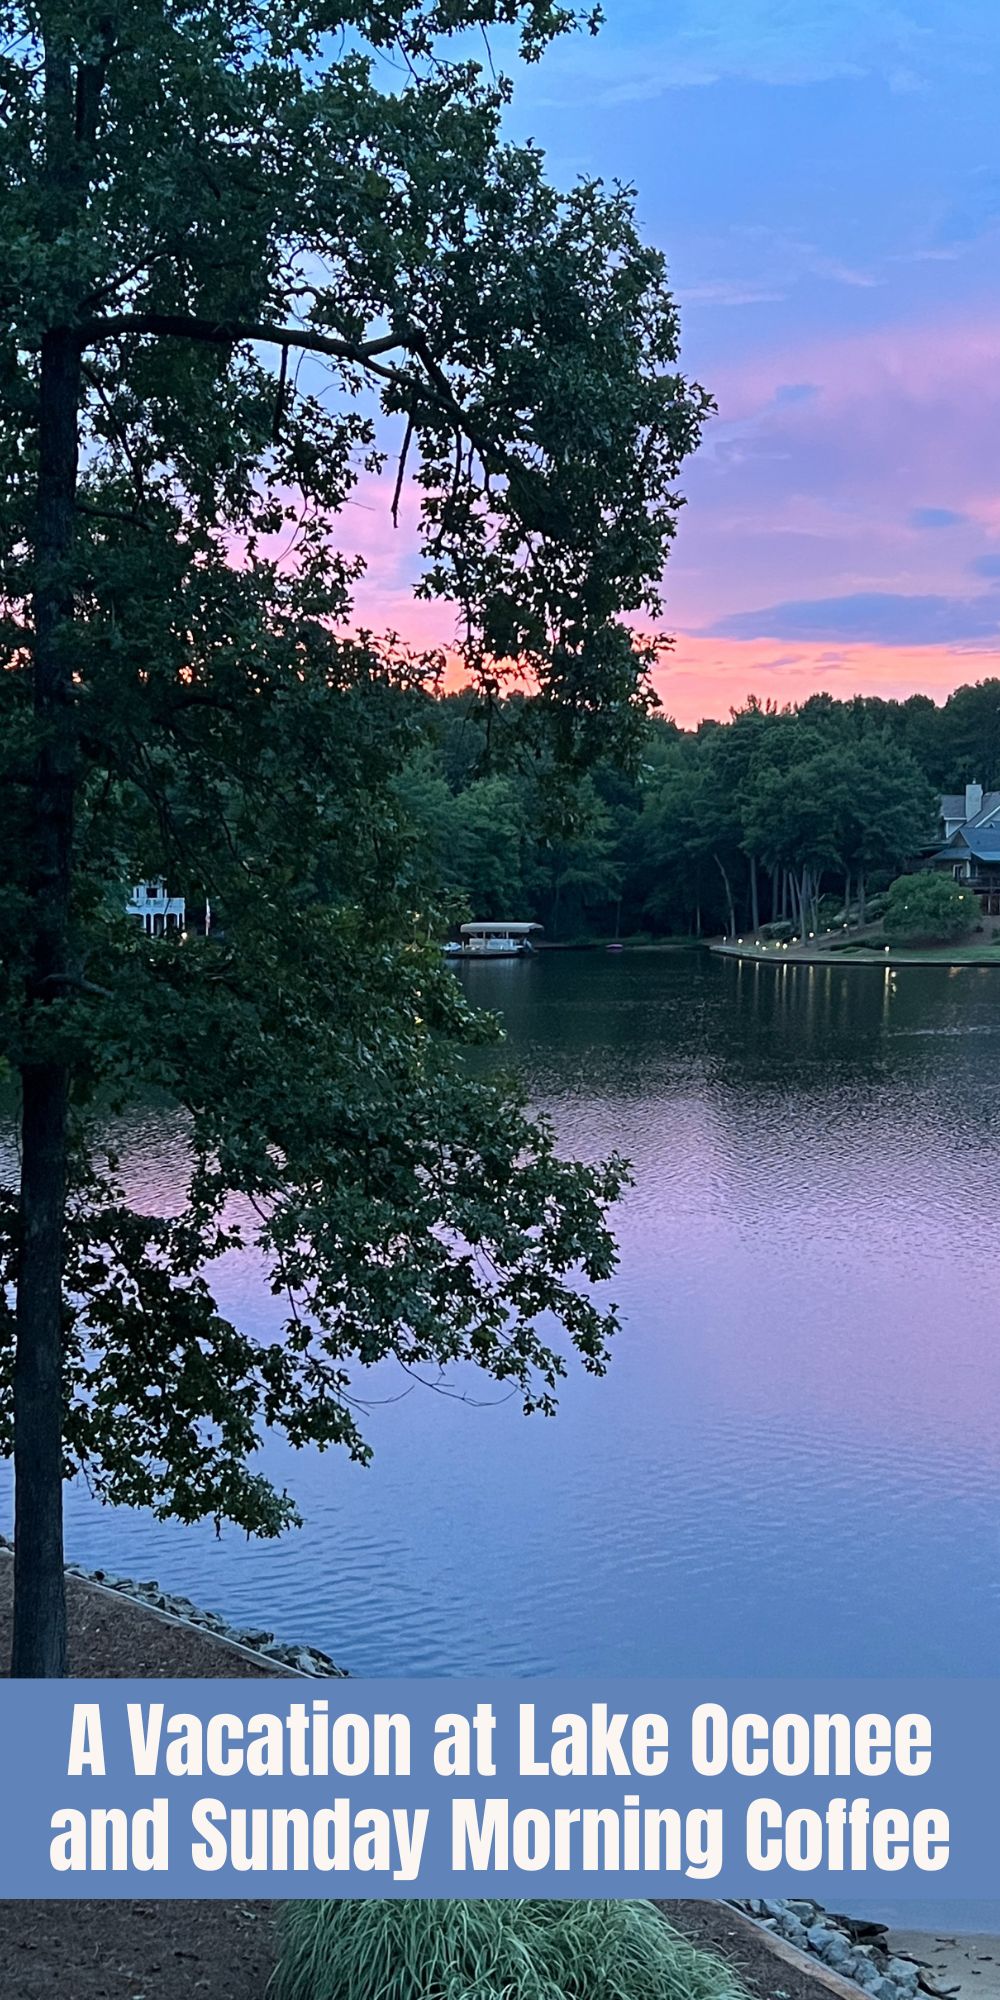 I have been in Georgia all week on vacation. We arrived at Lake Oconee mid-week and are loving staying at the lake house! It's glorious.